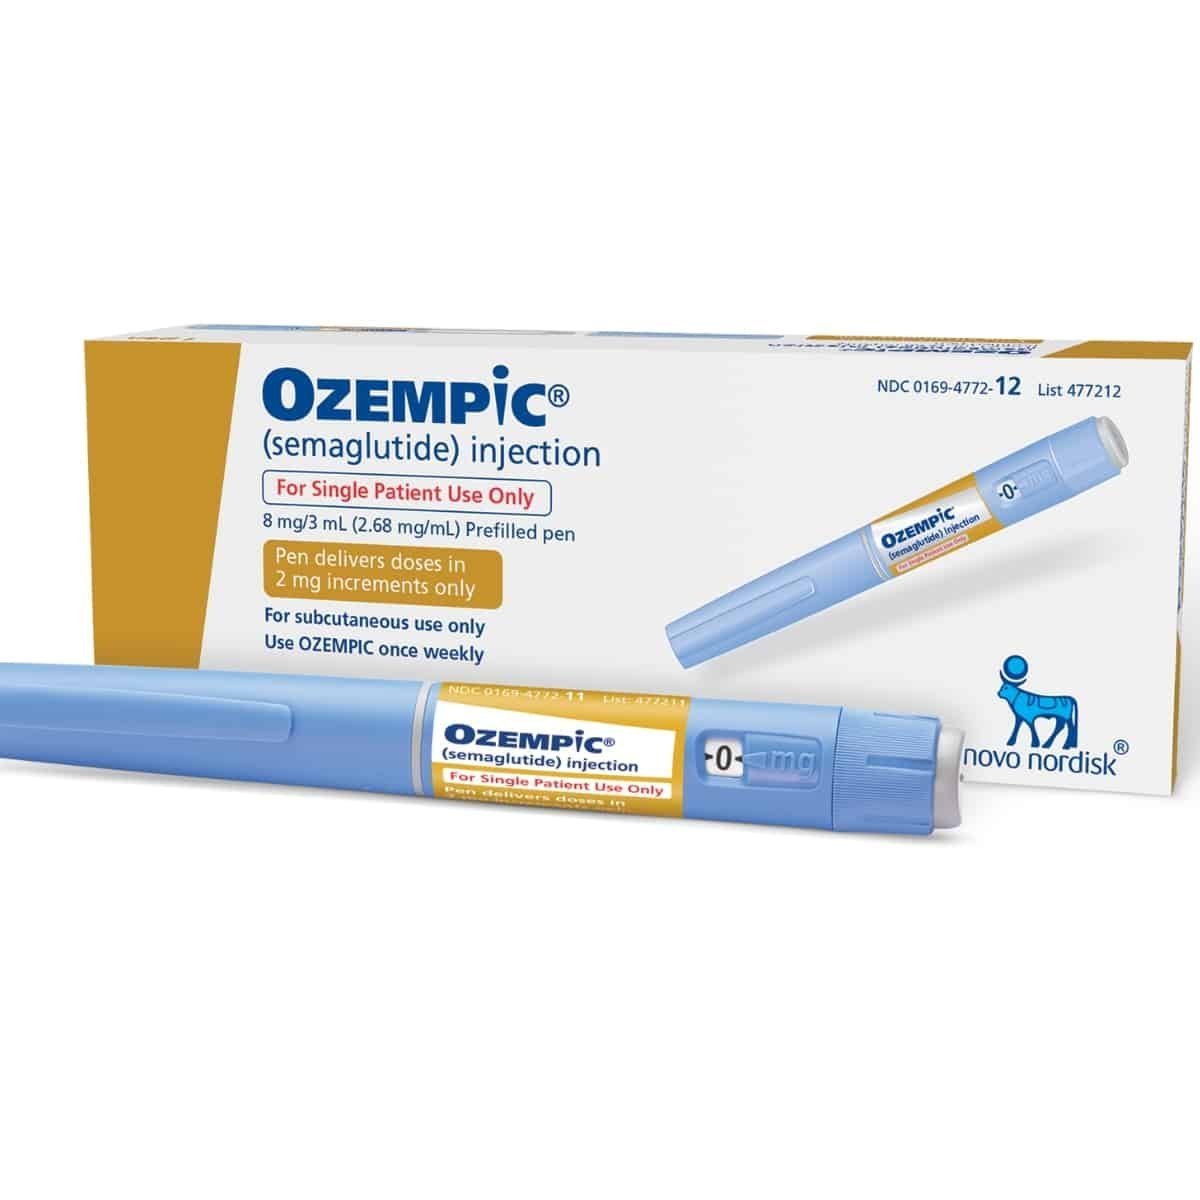 How Ozempic Can Lower the Risk of Heart Disease and Manage Blood Sugar Levels